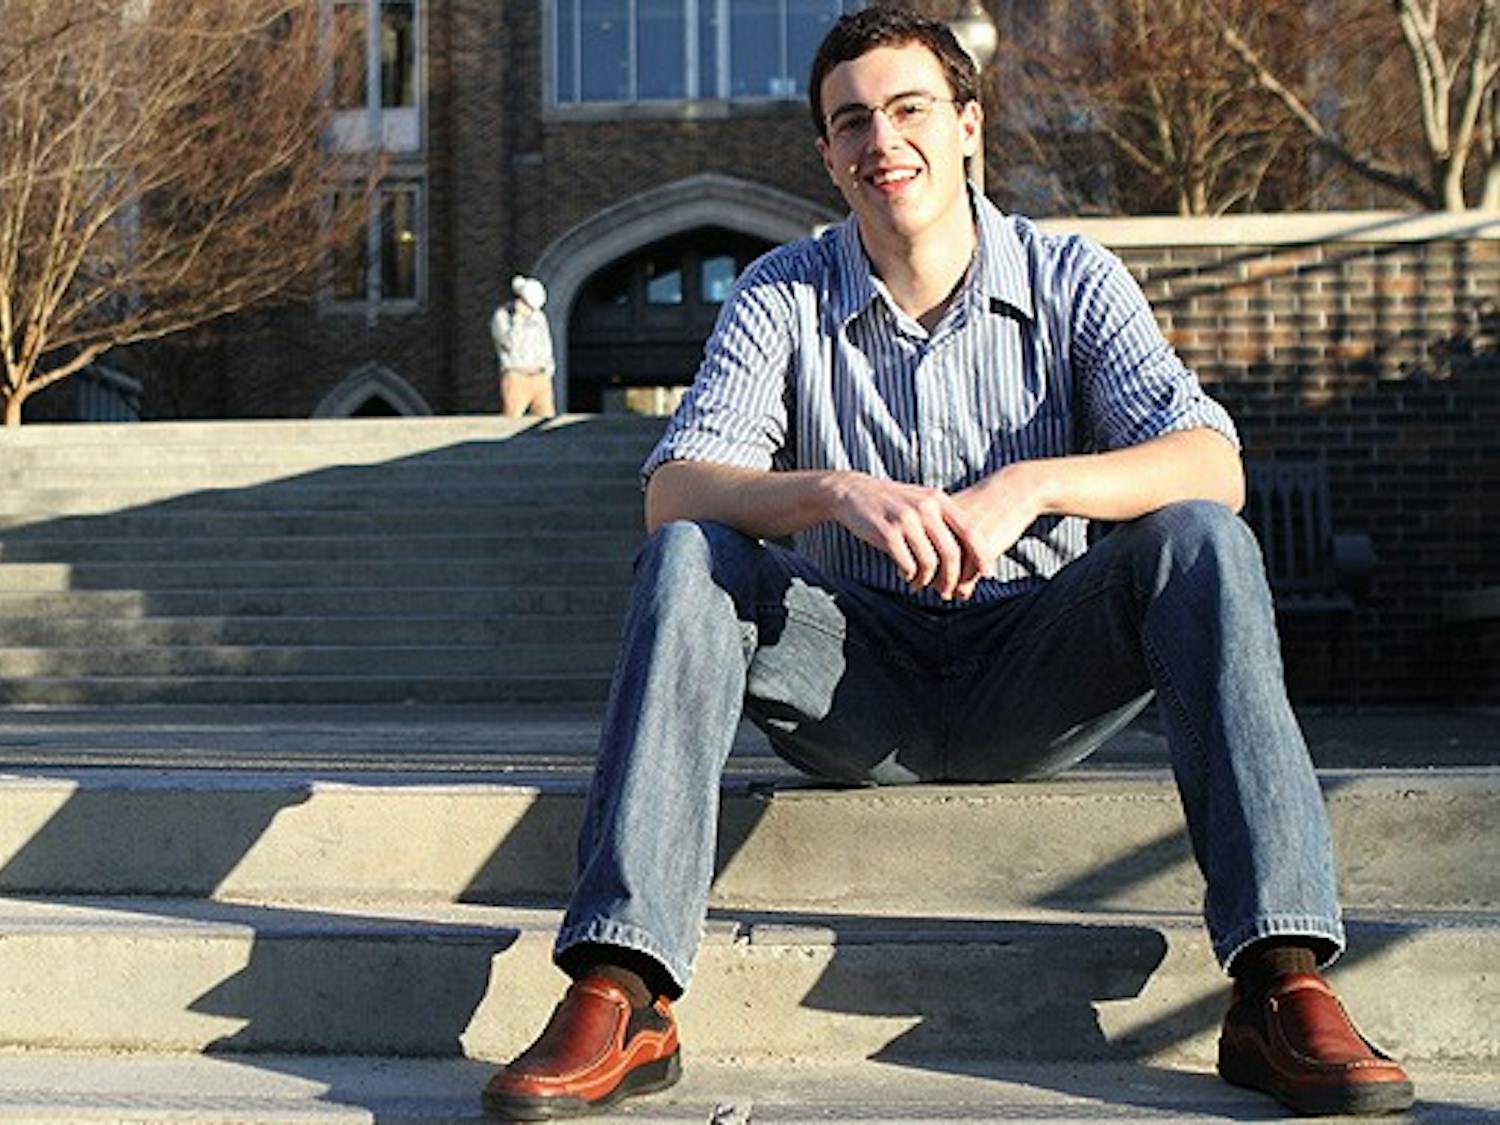 A co-founder of the selective living group Ubuntu, senior Ben Getson aims to promote interdisciplinarity and civic engagement in the classroom.